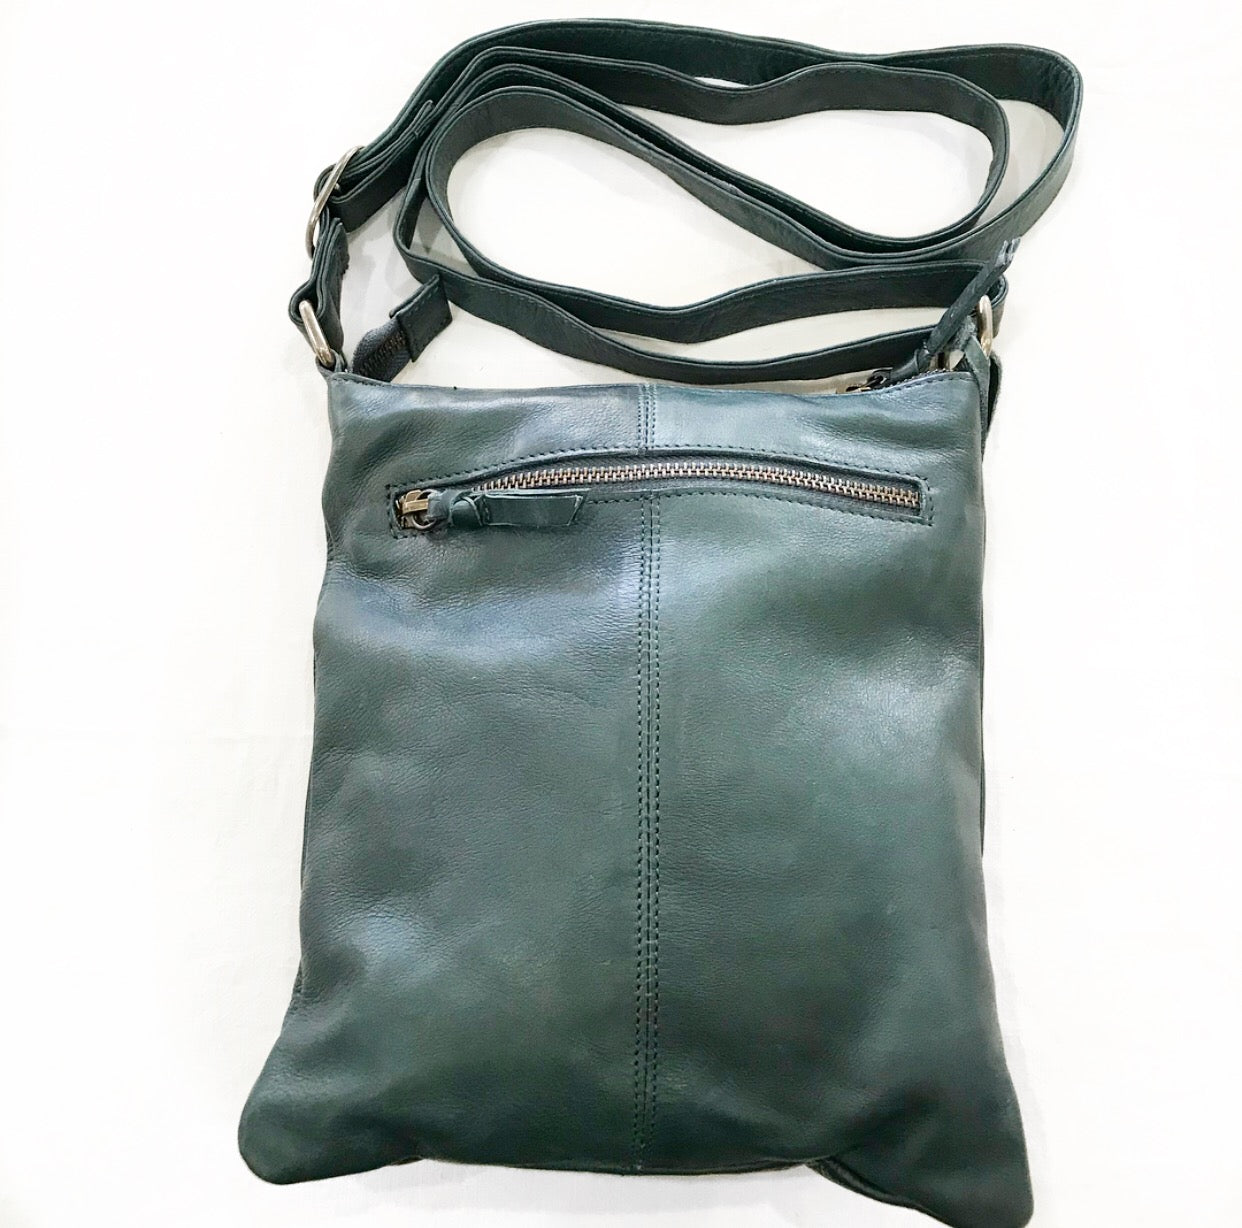 Oran By Rugged Hide Audrina Leather Crossbody [COLOUR:Graphite]